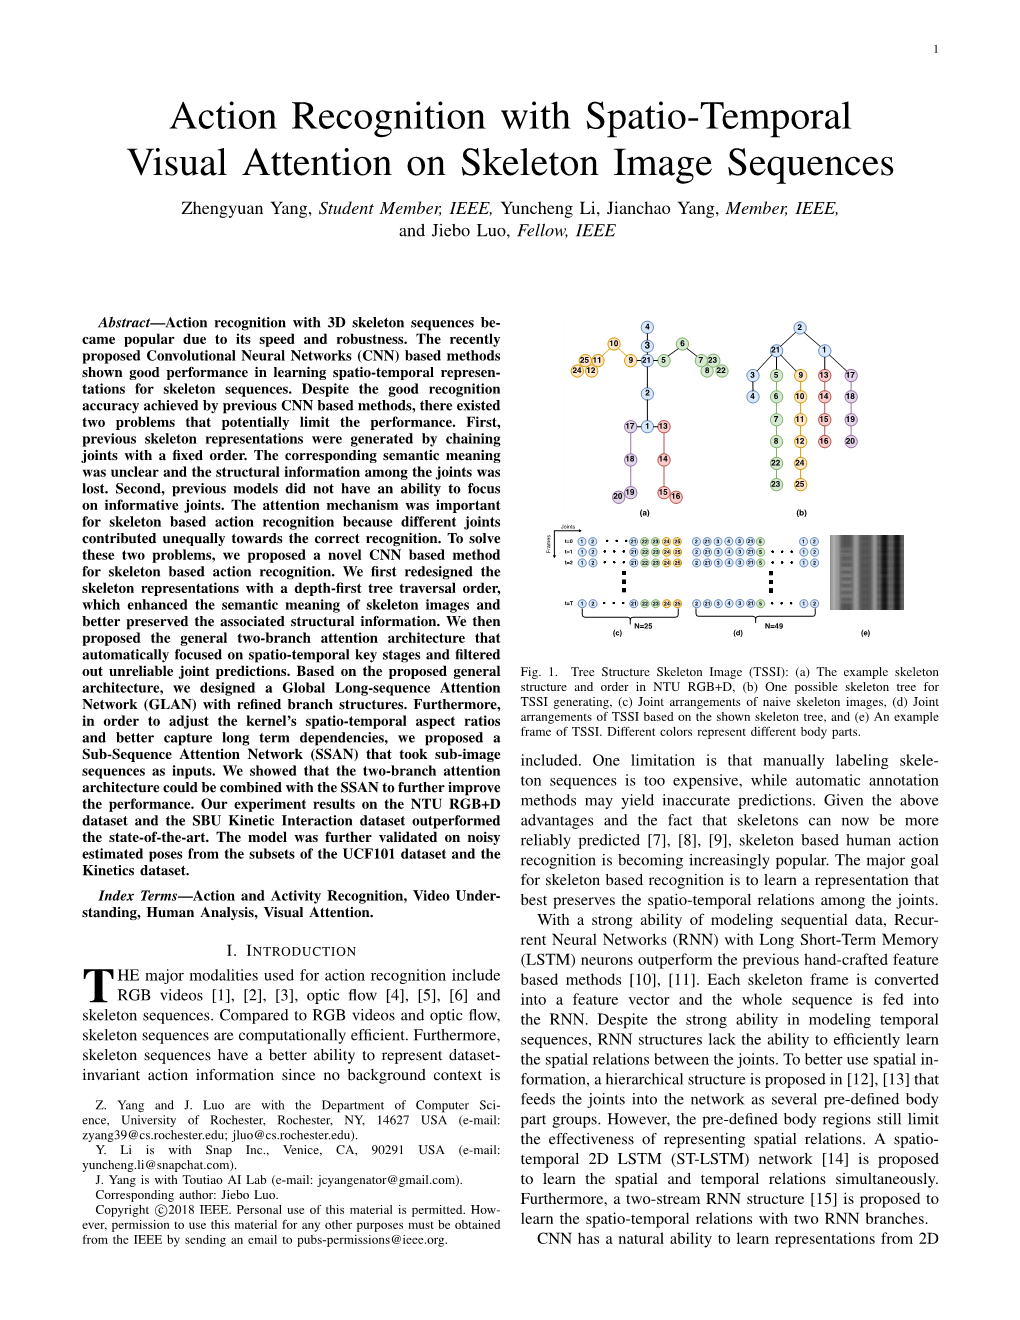 Action Recognition with Spatio-Temporal Visual Attention on Skeleton Image Sequences